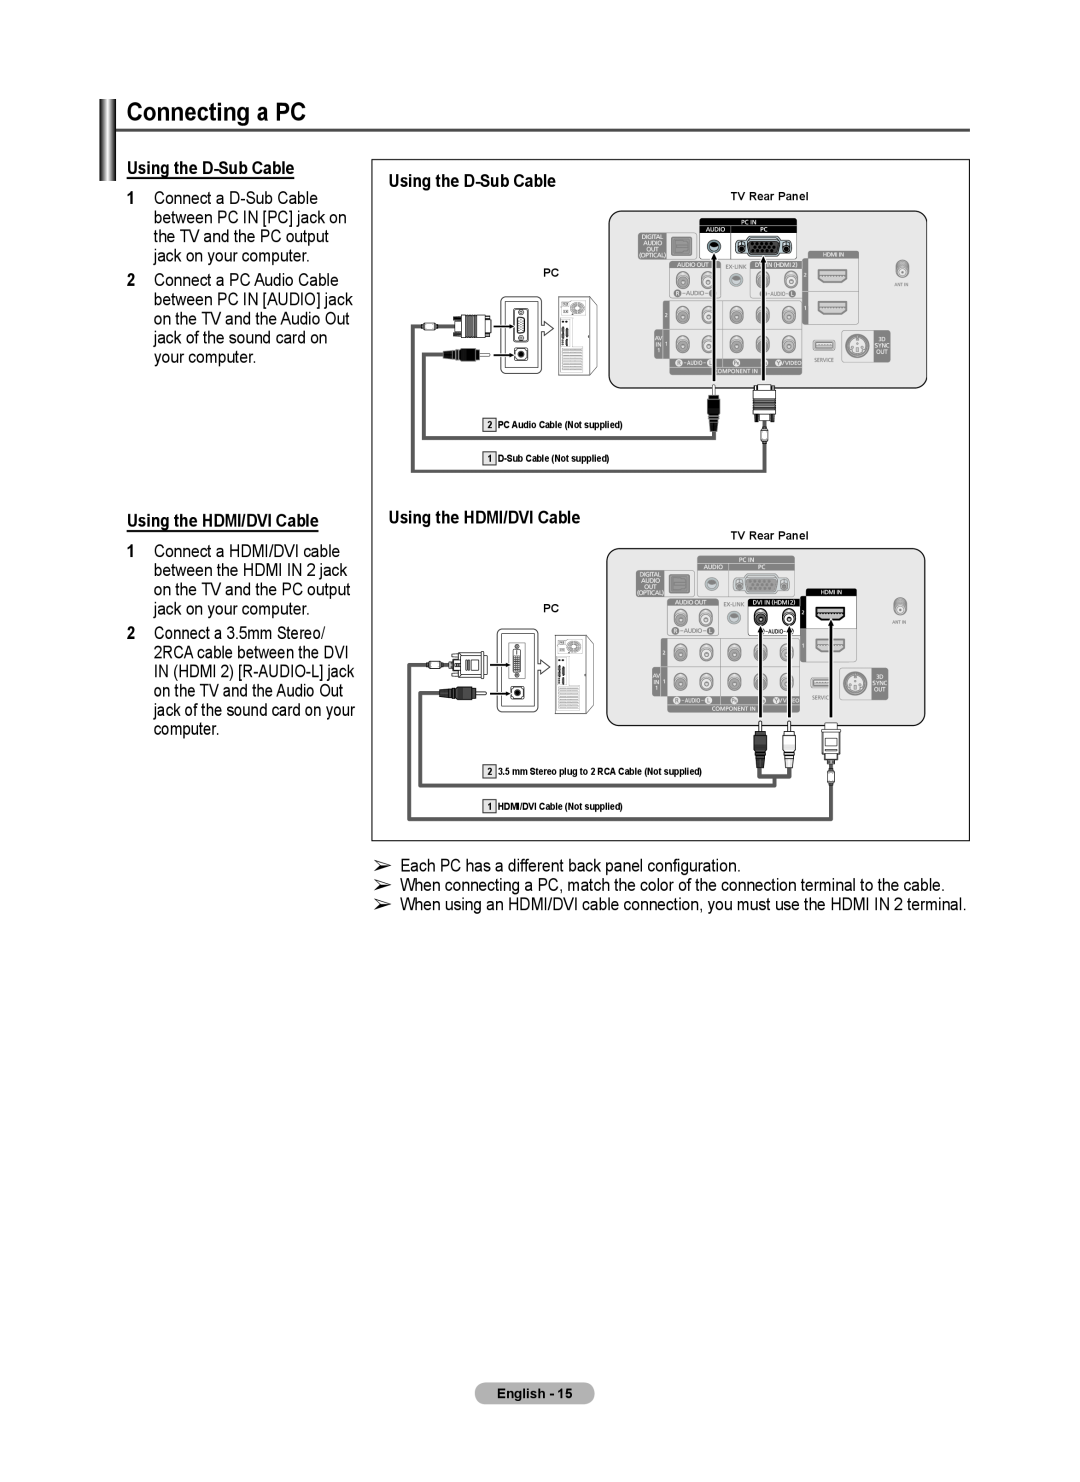 Samsung 460 user manual Connecting a PC, Using the D-Sub Cable, Using the HDMI/DVI Cable 